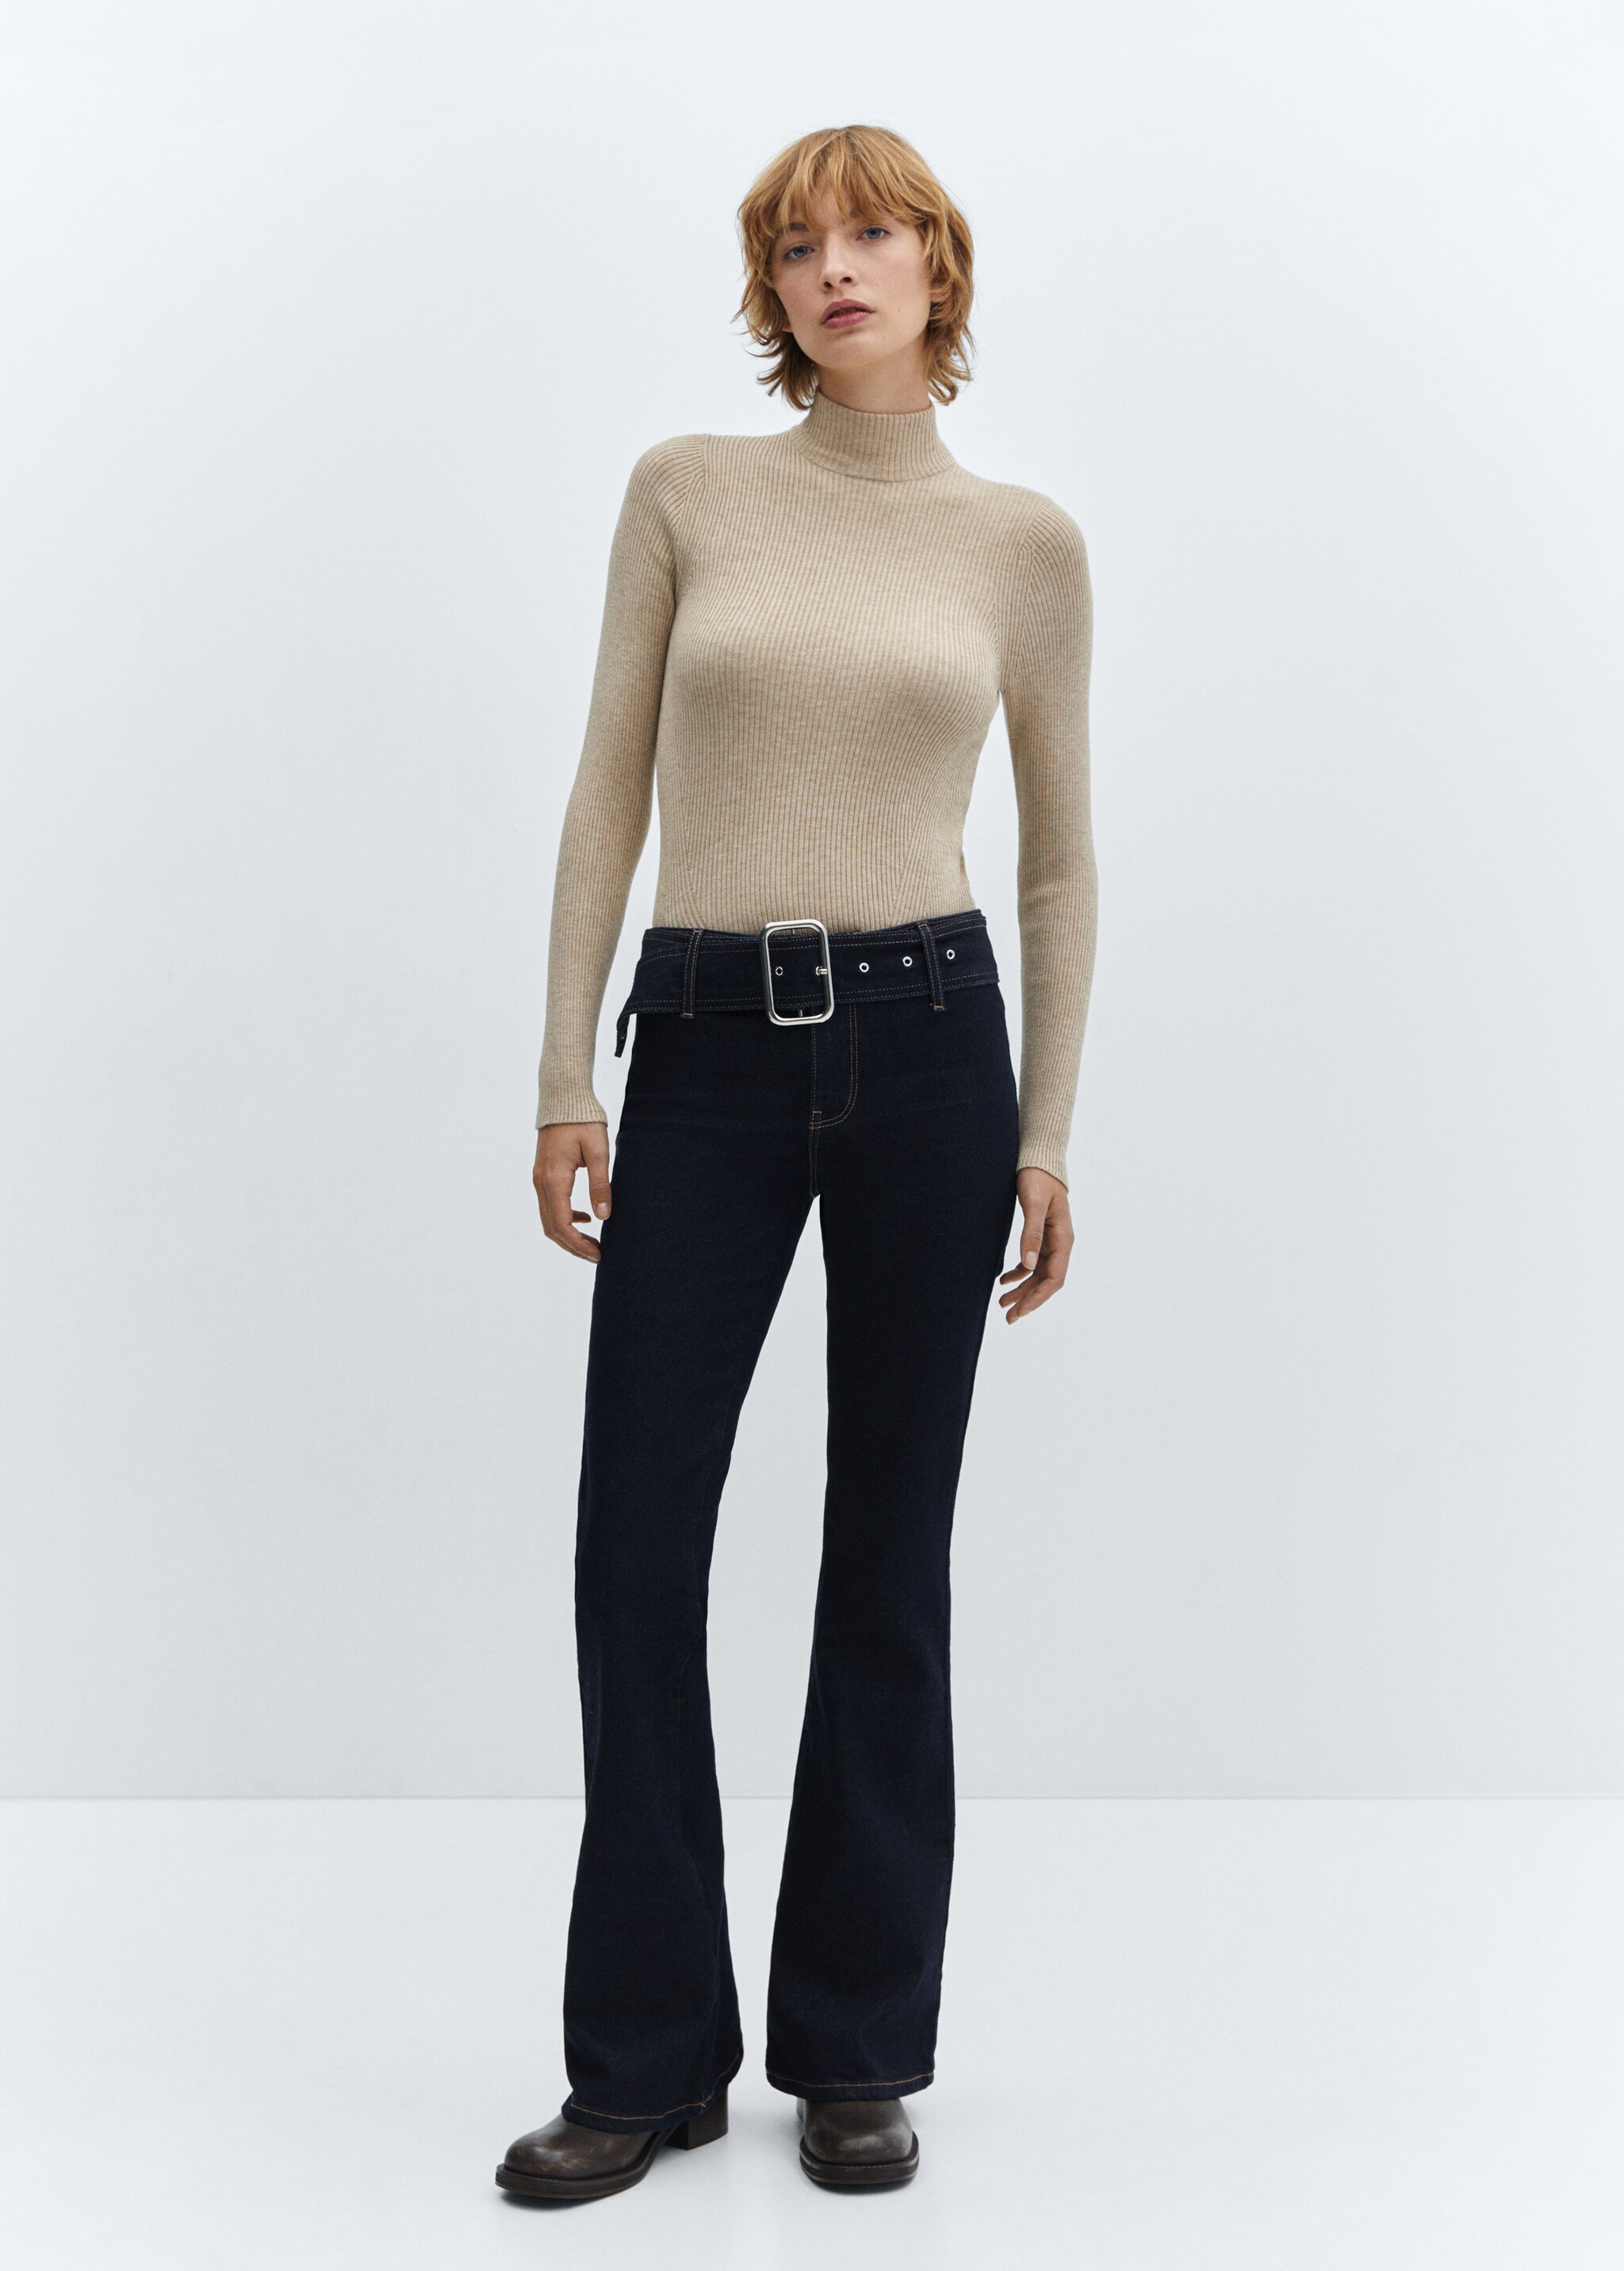 Flared jeans with belt - General plane